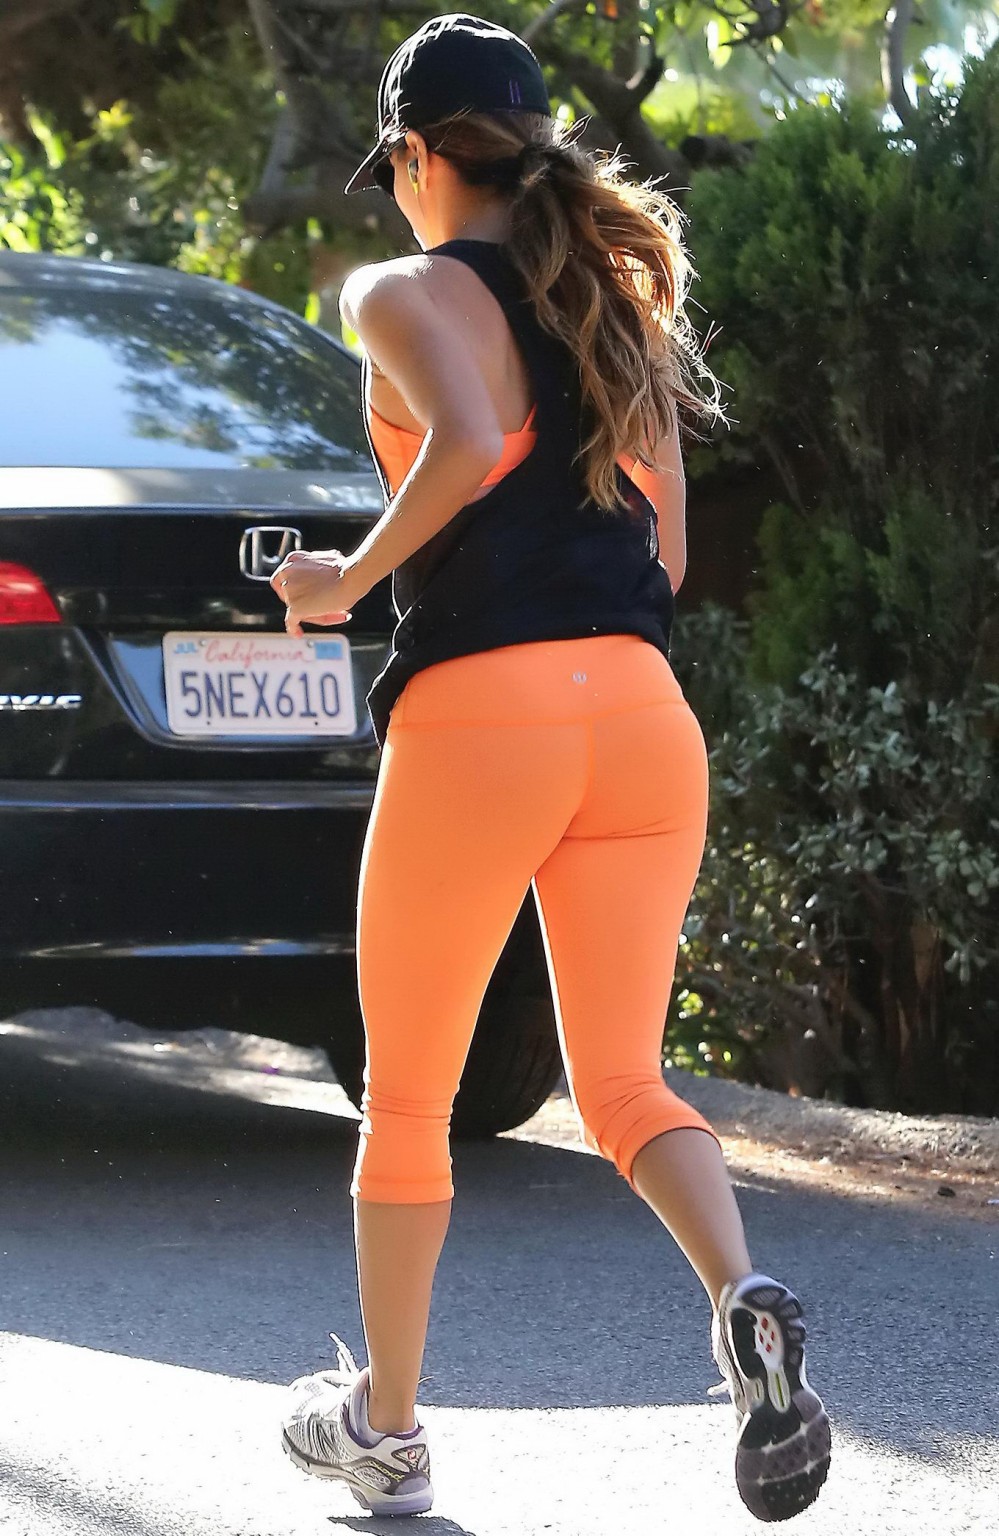 Eva Longoria jogging in tight sports outfit showing cleavage, ass  cameltoe out  #75213898